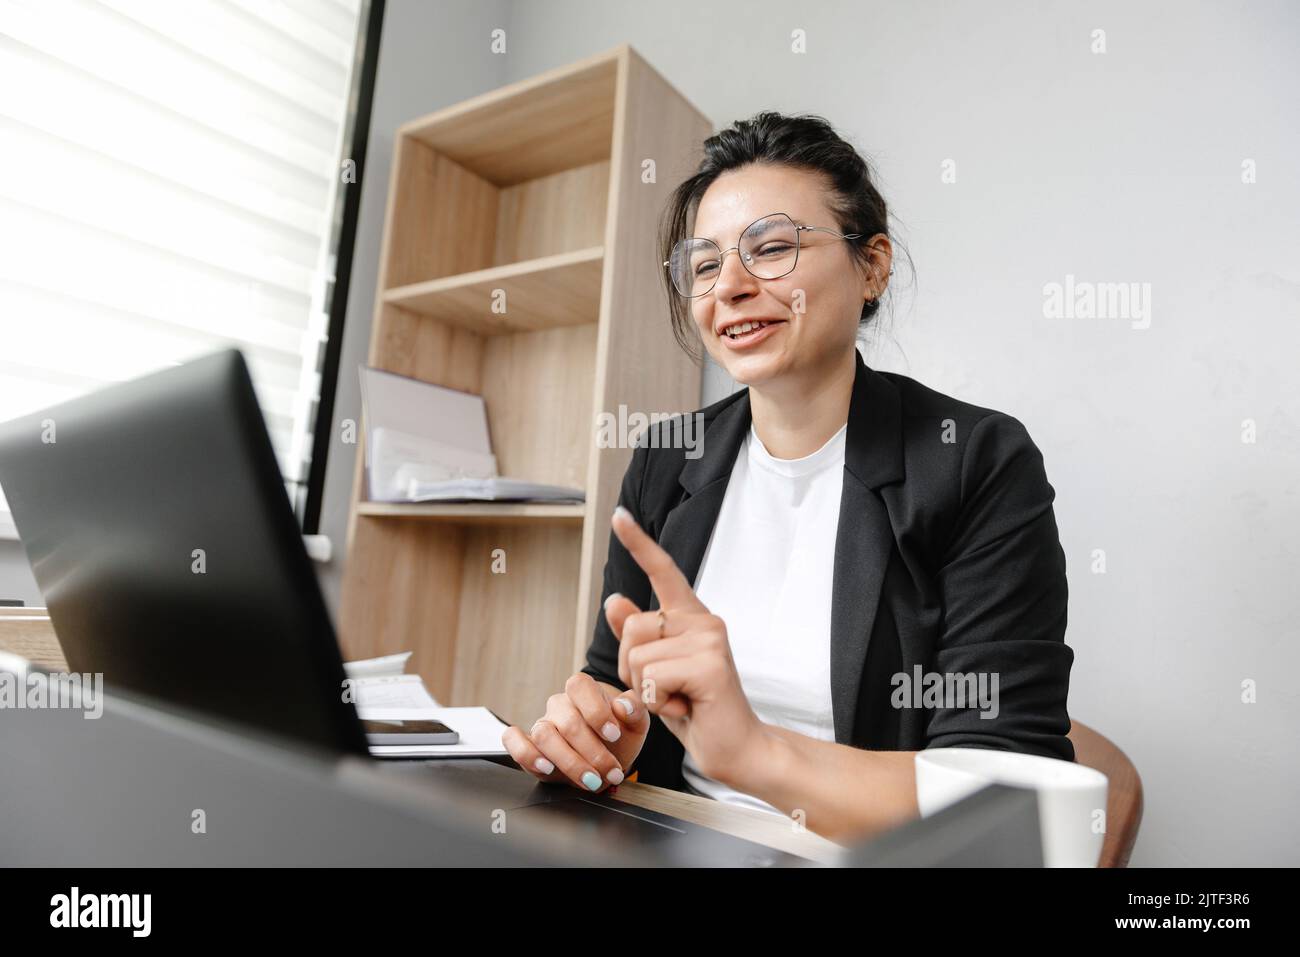 The girl in the office is running an online conference and saying something. Working in an office hybrid work system Stock Photo